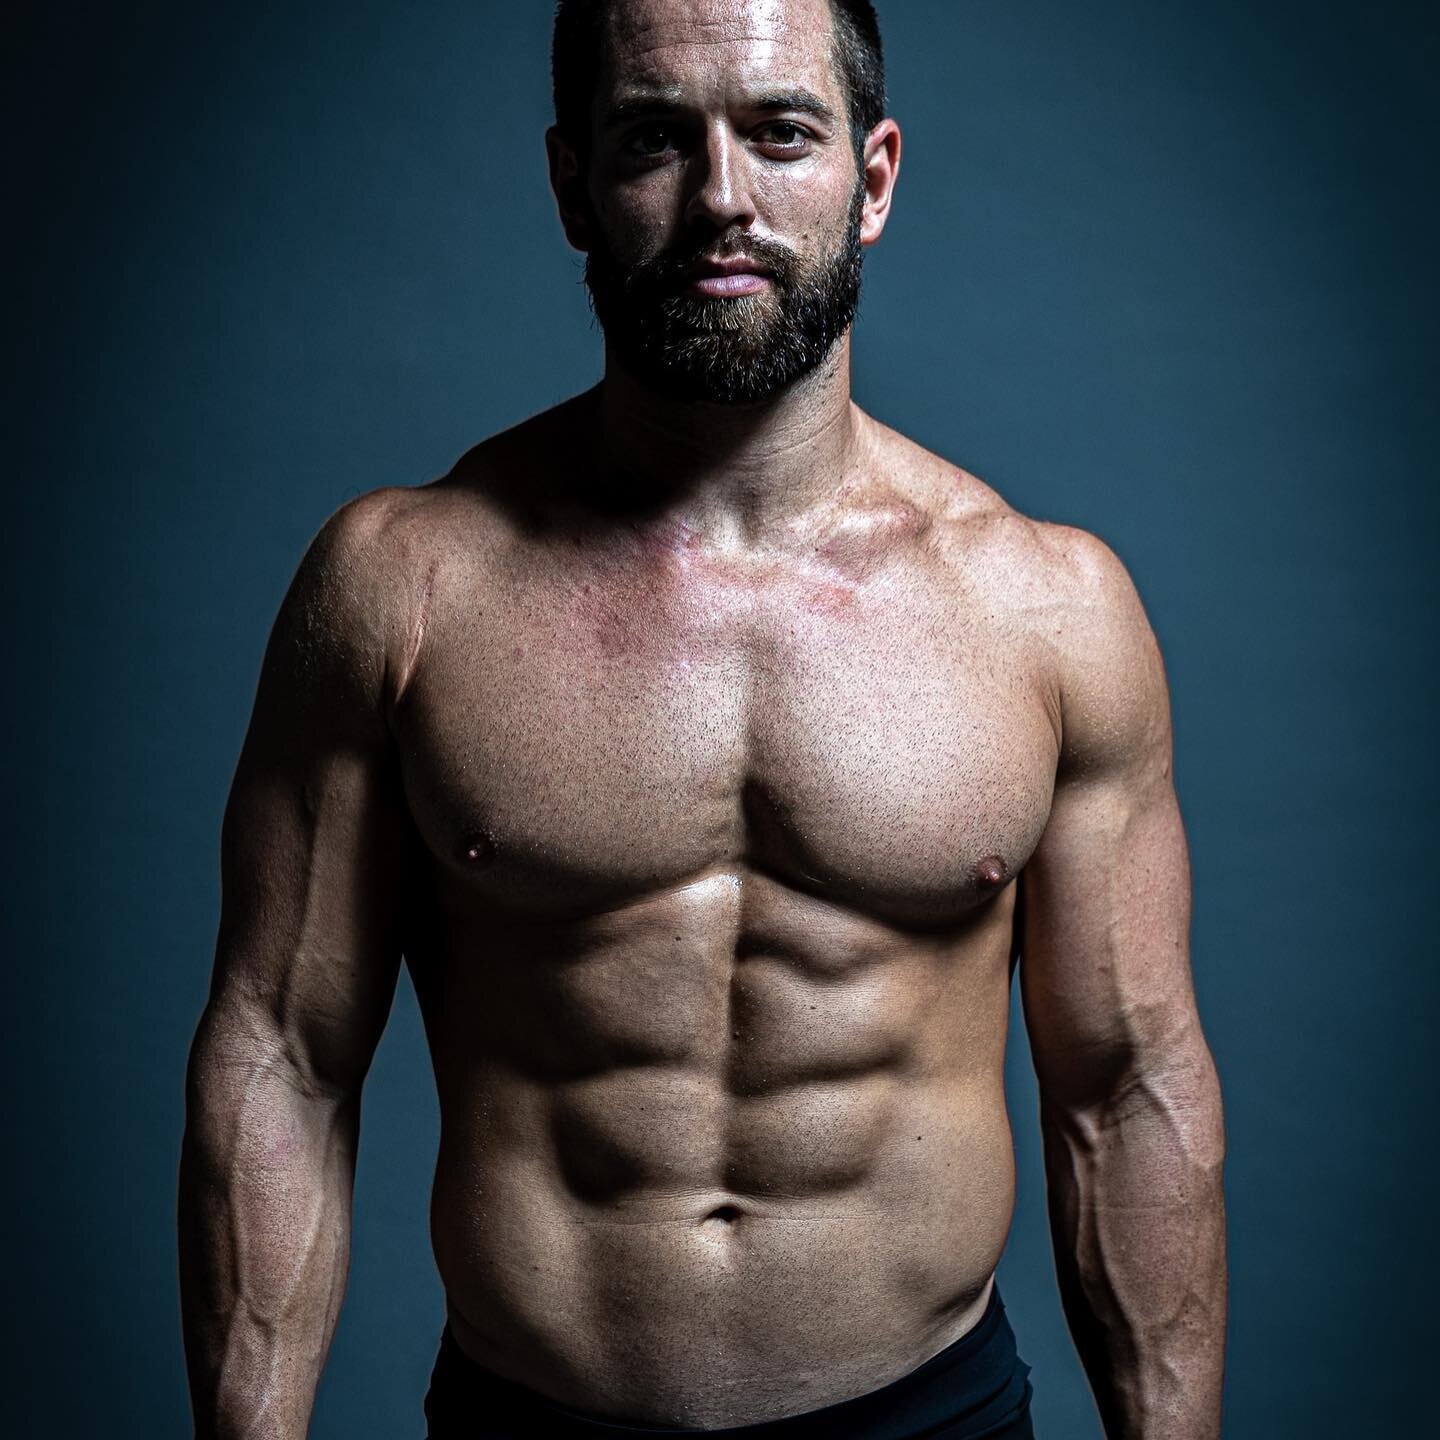 Two new story updates on my website. One about pushing through this time gastronomically and the other about pushing the limits of fitness....
.
.
.
.
.
#photographer #foodphotography #richfroning #BBQ #sushi 📸@scottharben
#scottharbenphotography #t